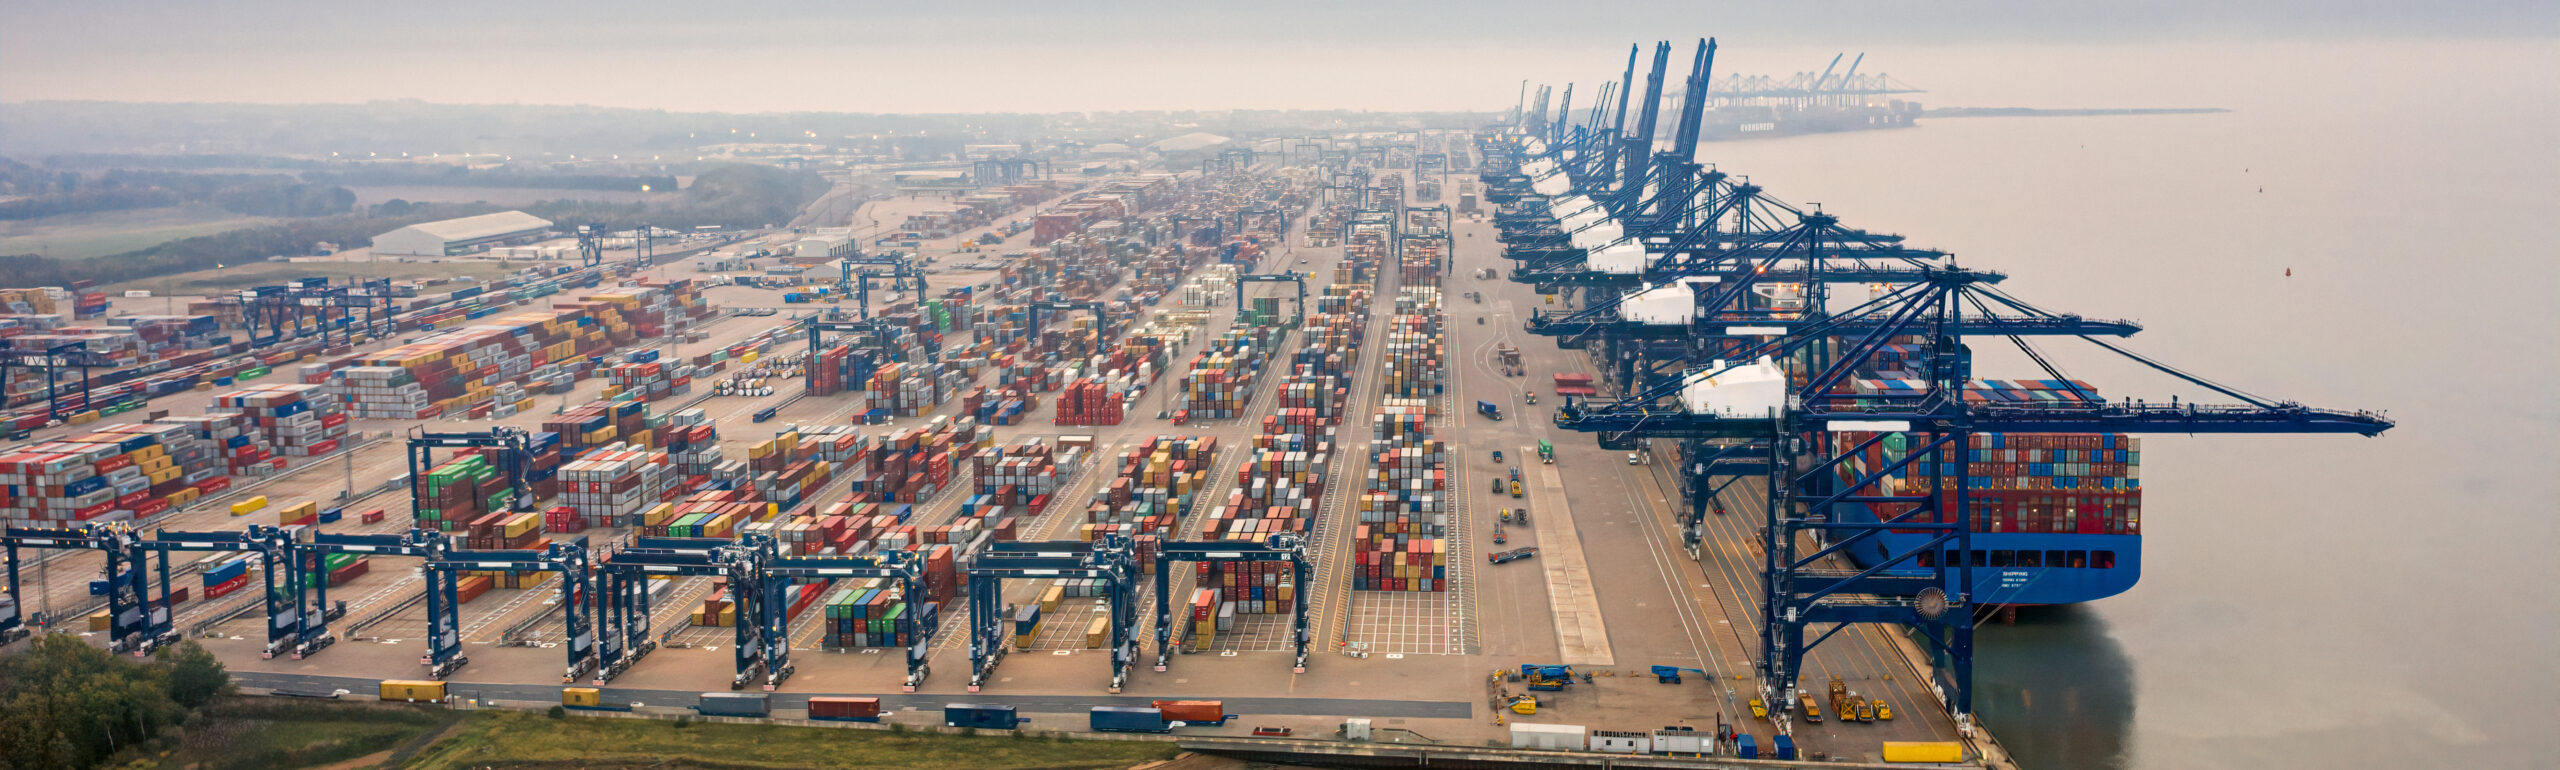 42 Days to the end of Brexit and Felixstowe port is already rammed